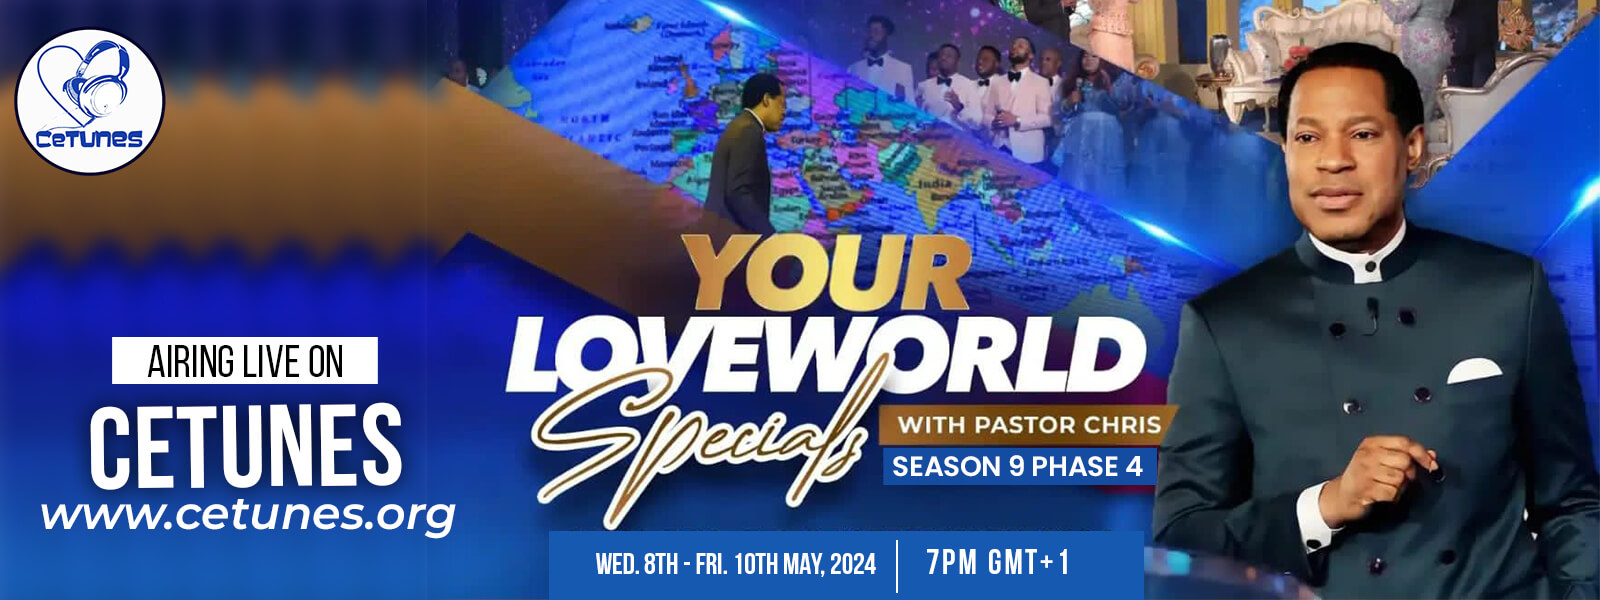 YOUR LOVEWORLD SPECIAL WITH PASTOR CHRIS SEASON 9 PHASE 4 